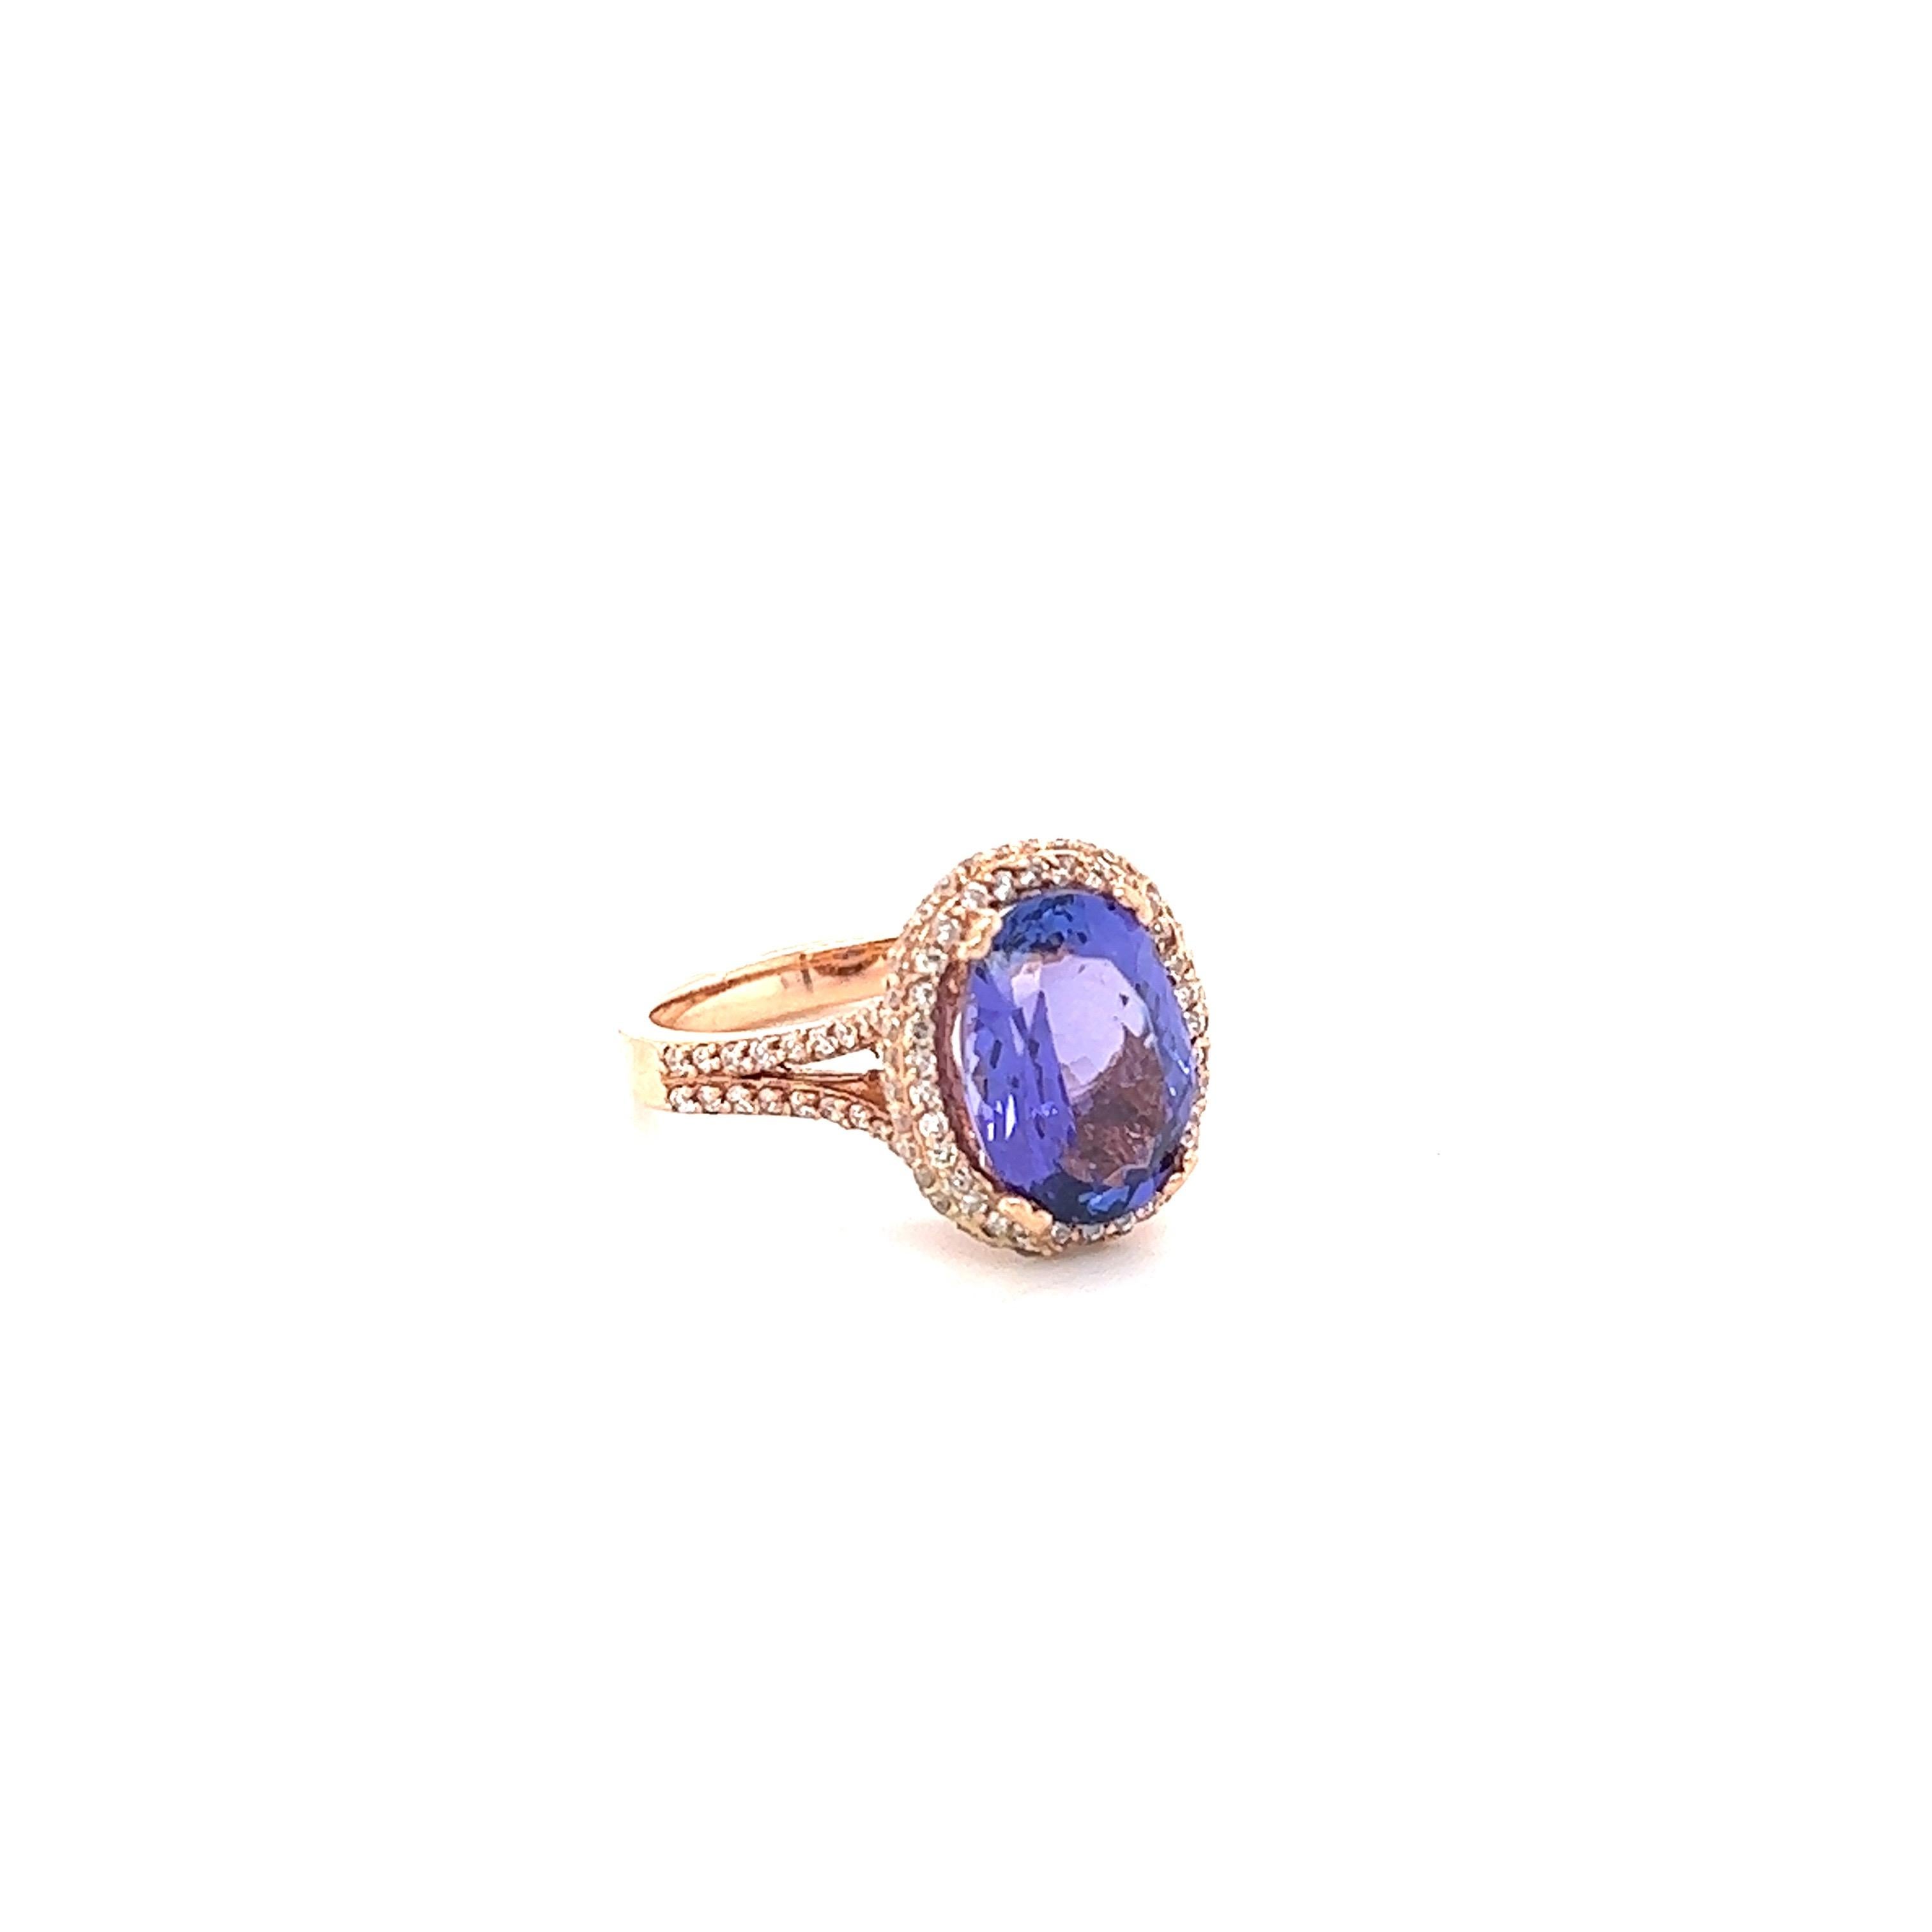 This ring has a radiant purple Oval Cut Natural Tanzanite weighing 3.95 Carats. The Tanzanite measures at 11 mm x 9 mm. It is surrounded by 118 Round Cut Diamonds that weigh 0.62 Carats. The clarity and color of the diamonds are VS-H. The total